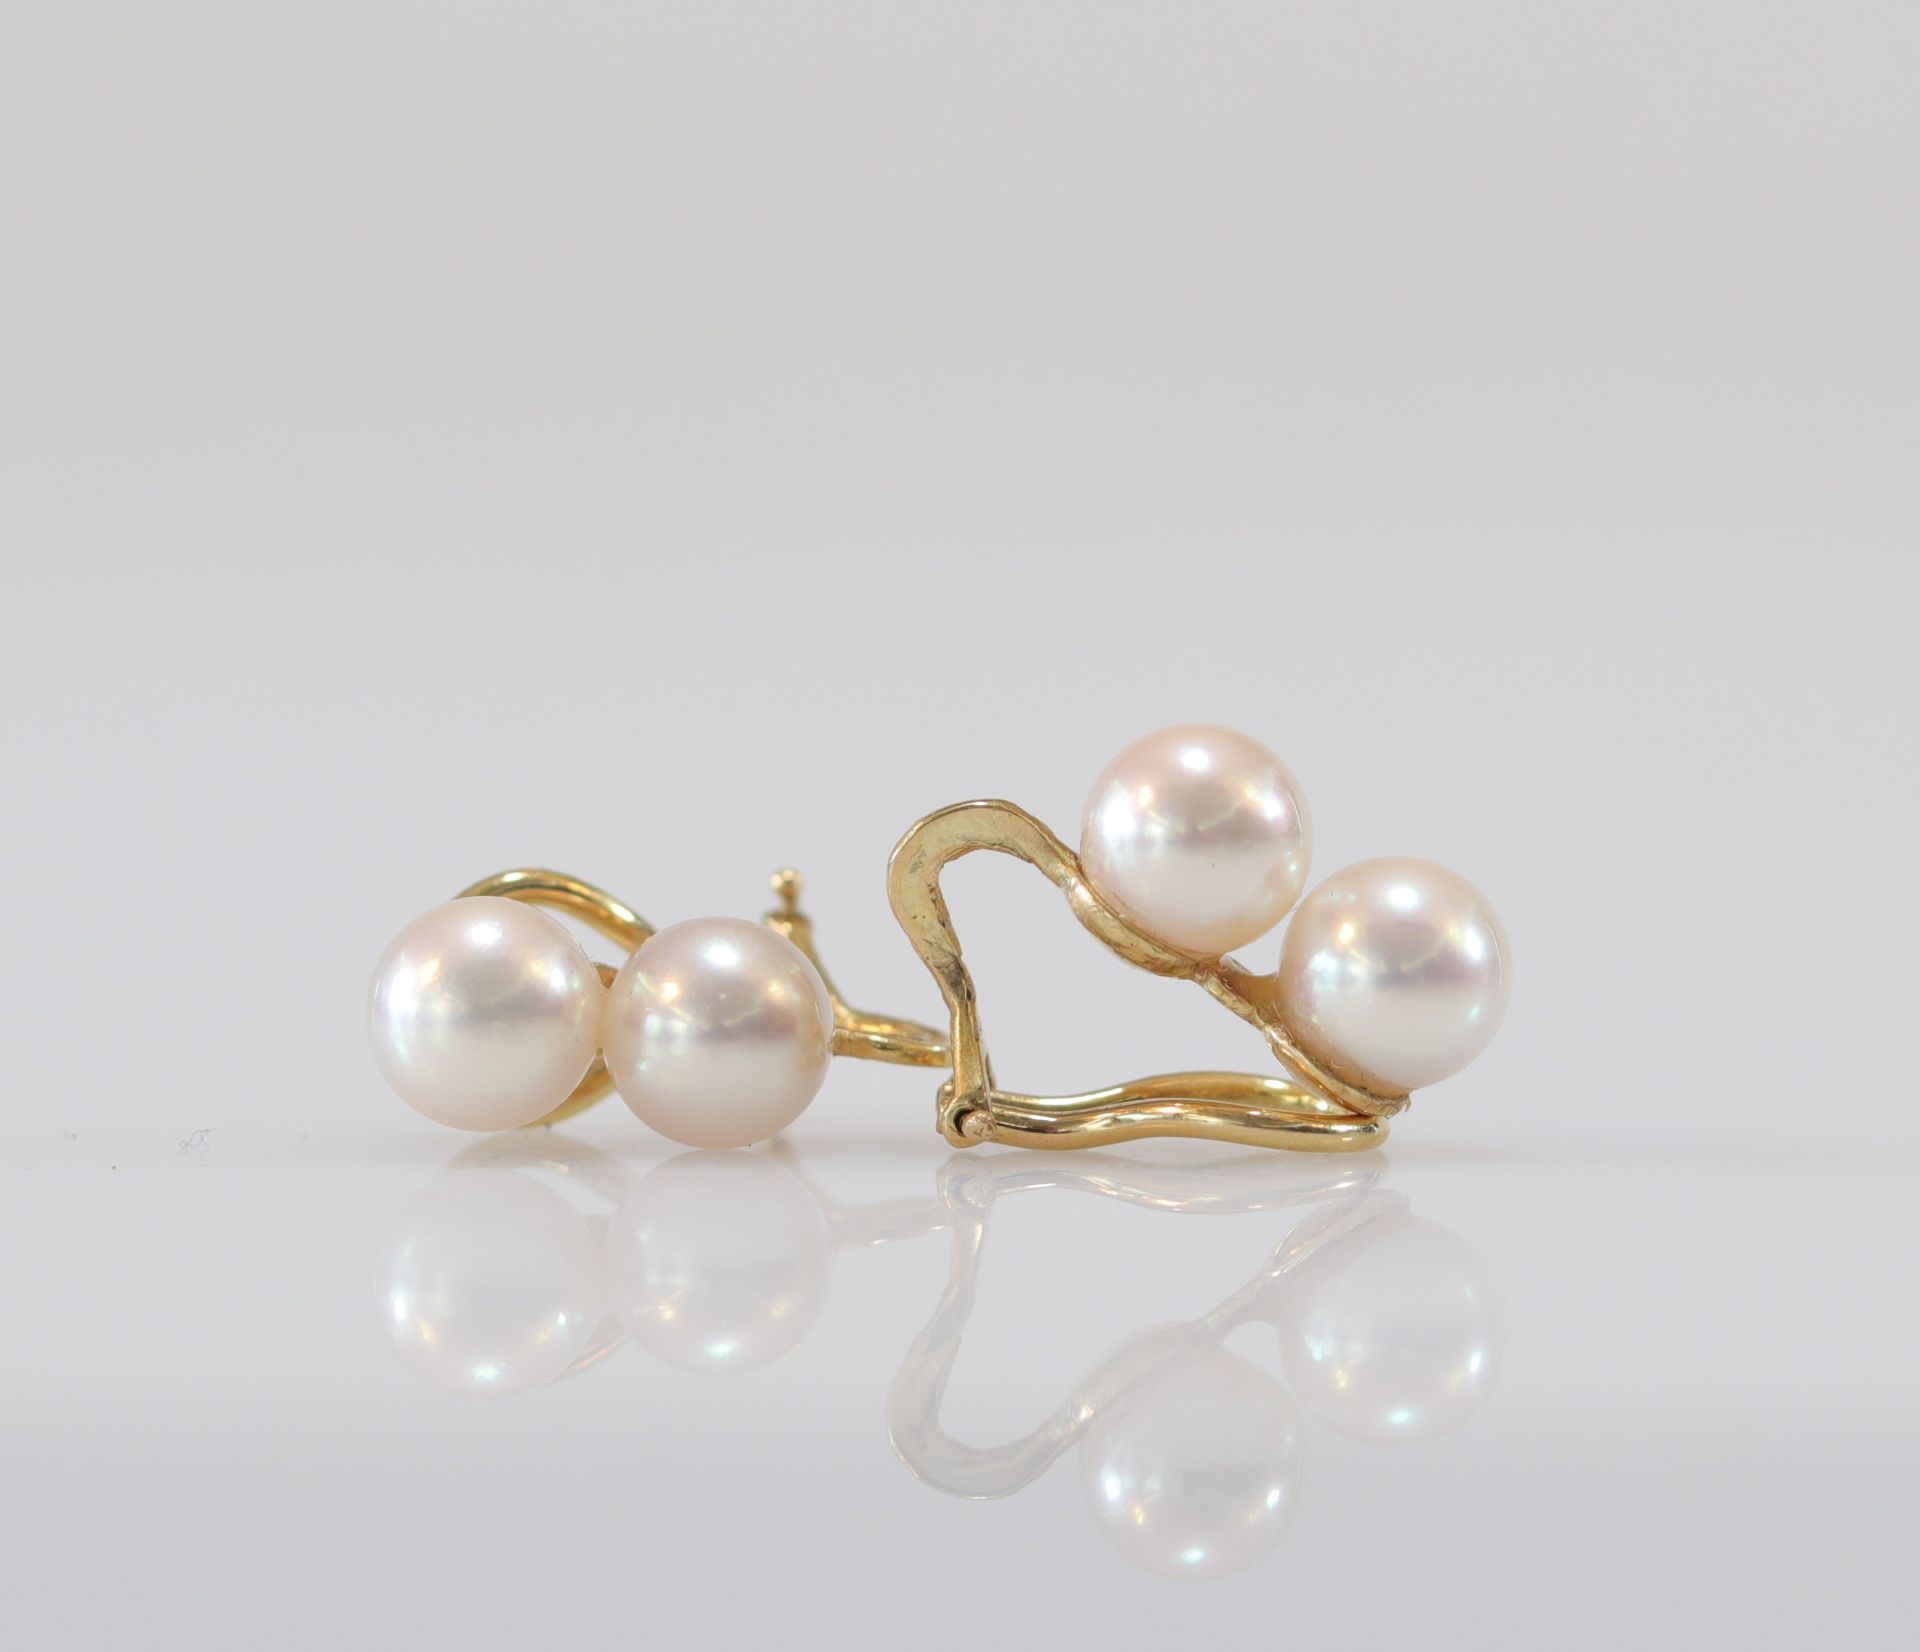 Pair of yellow gold and pearl earrings